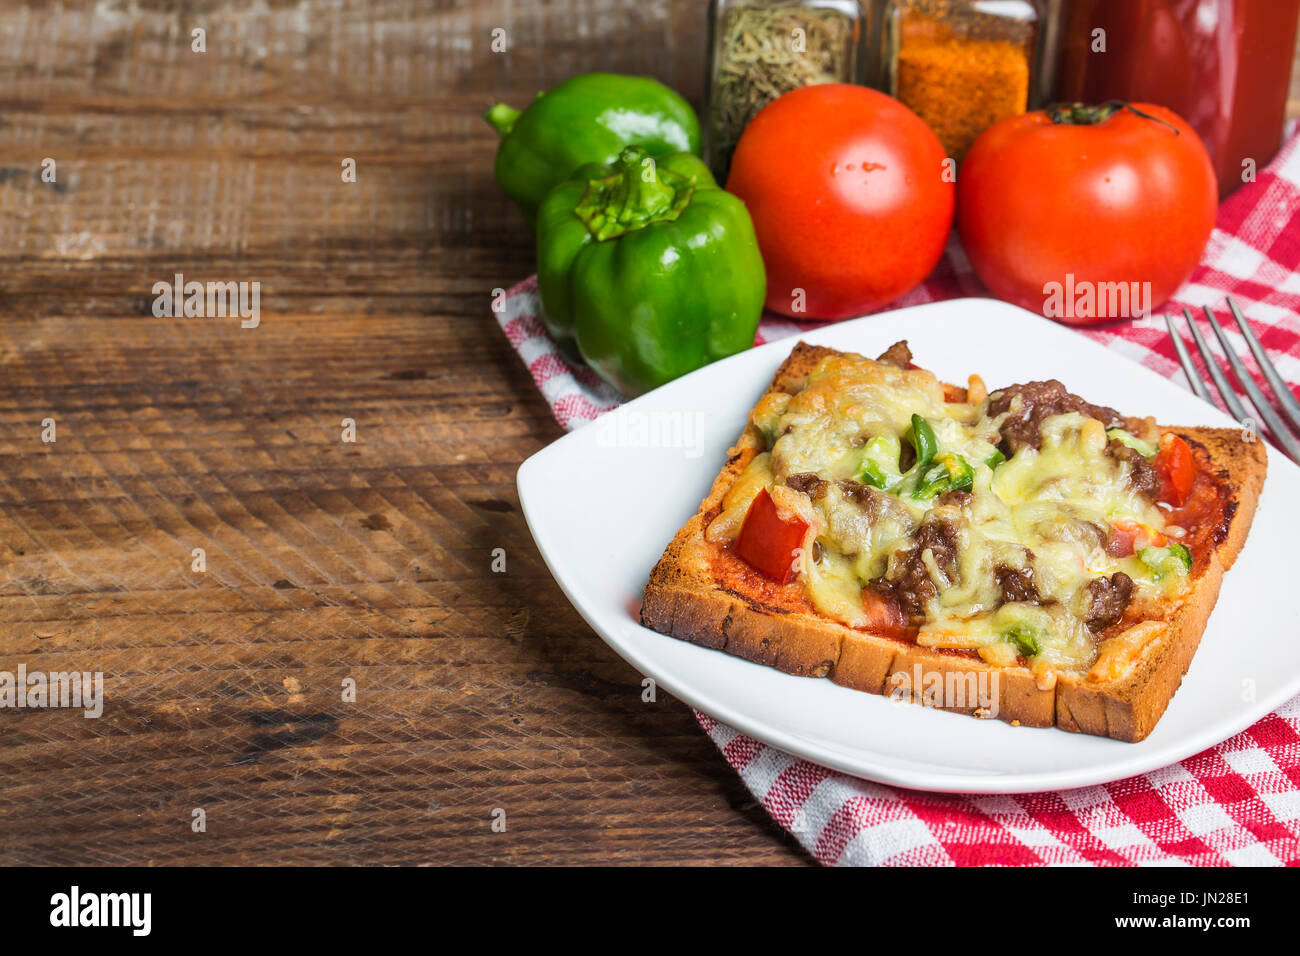 square mini pizza with vegetables and mushrooms Stock Photo